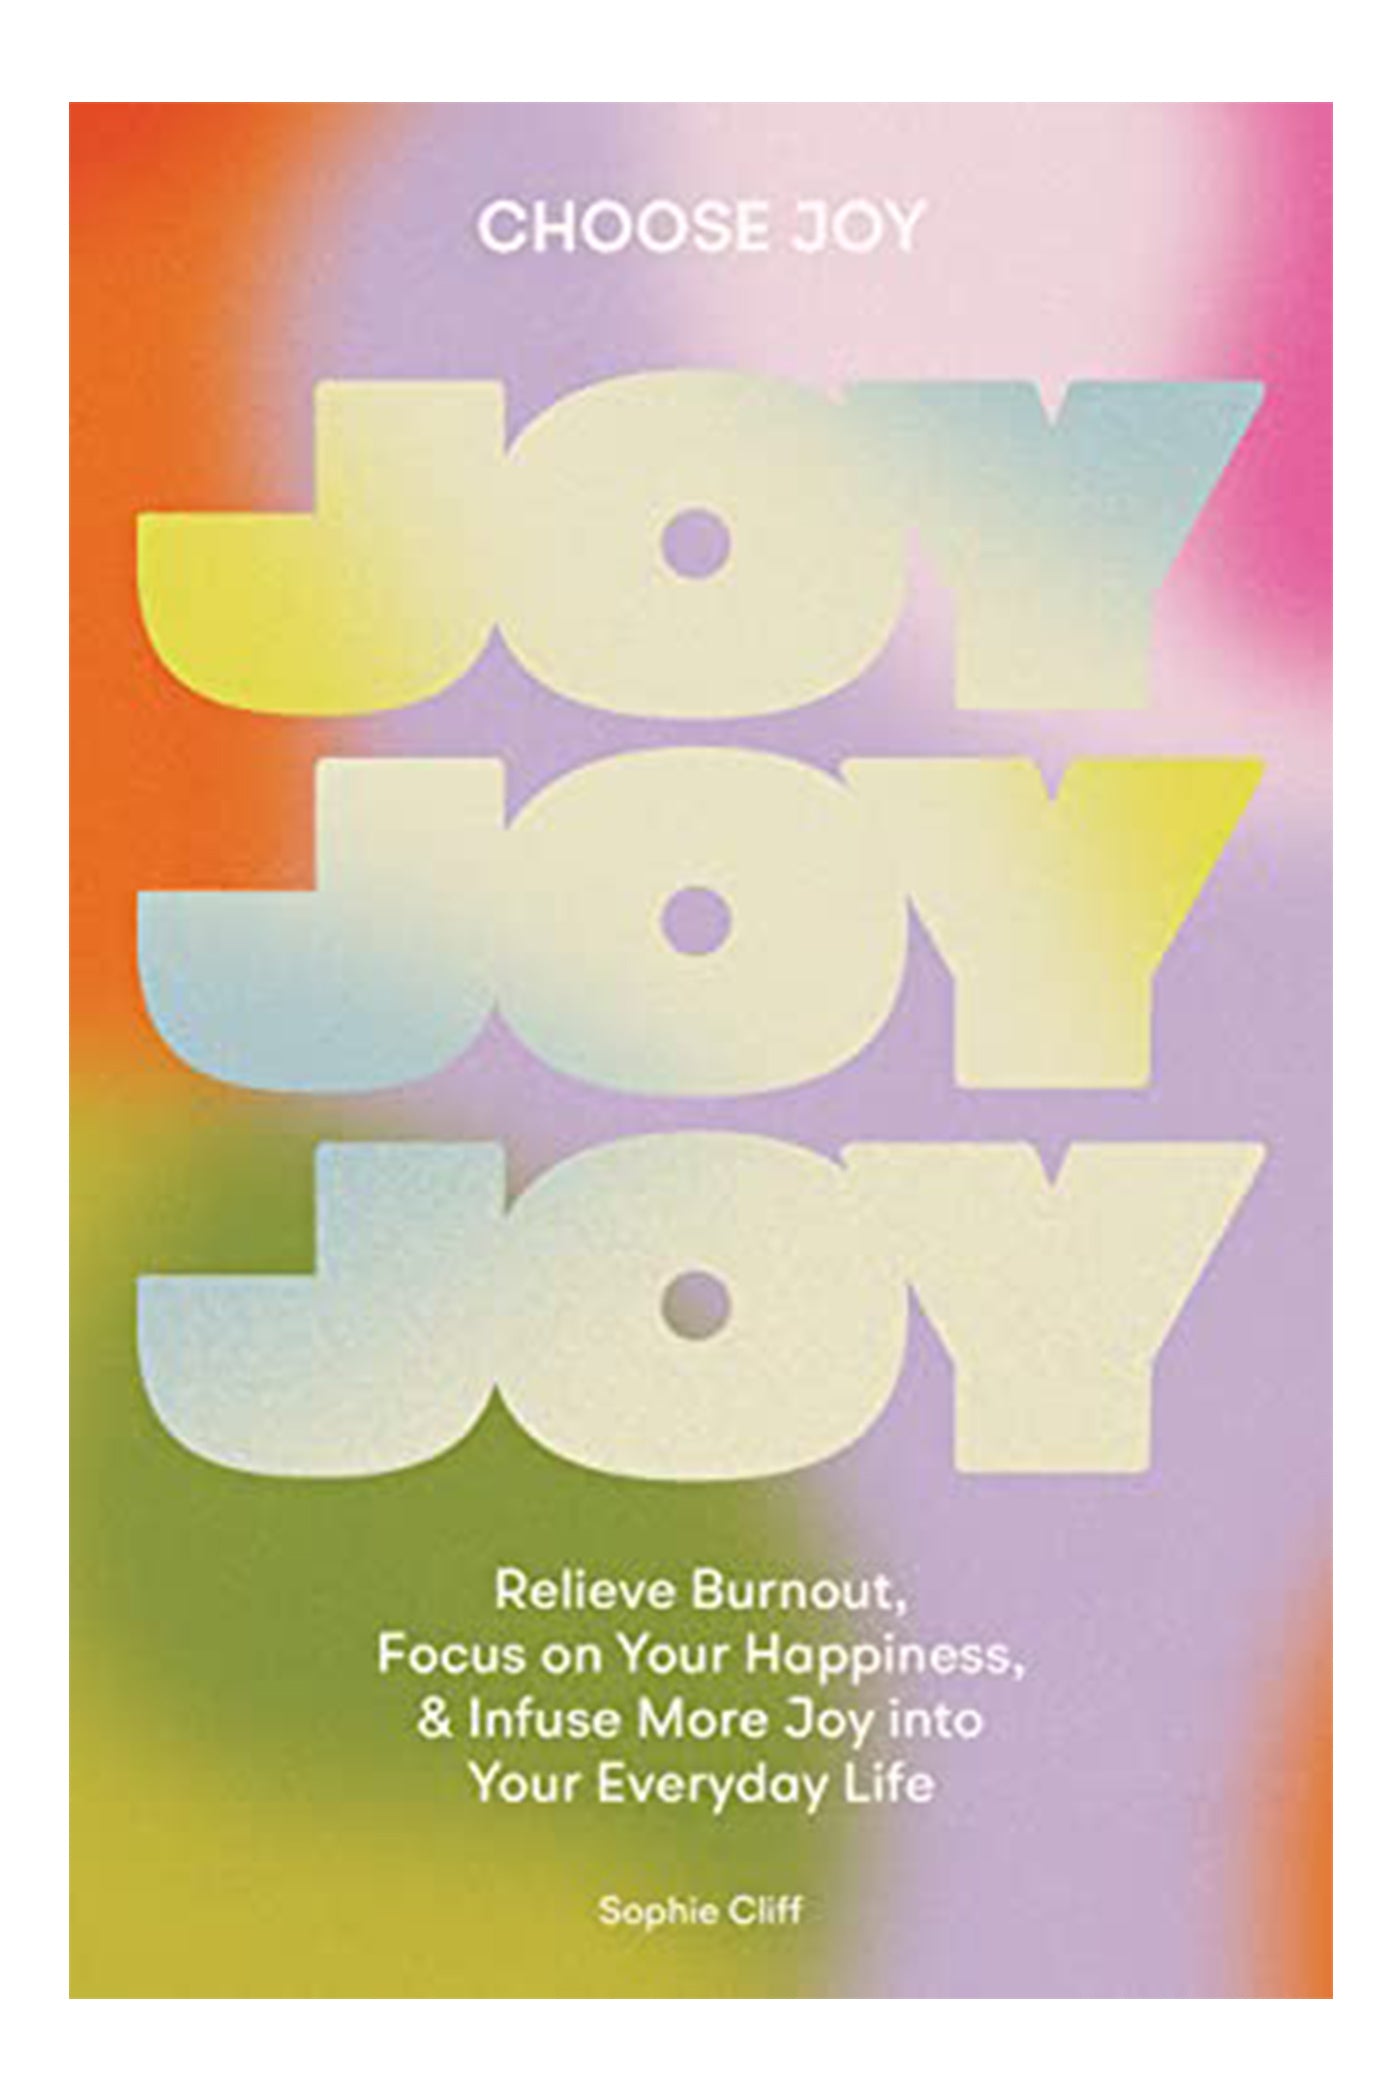 Choose Joy: Relieve Burnout, Focus on Your Happiness, and Infuse More Joy into Your Everyday Life Hardcover Book